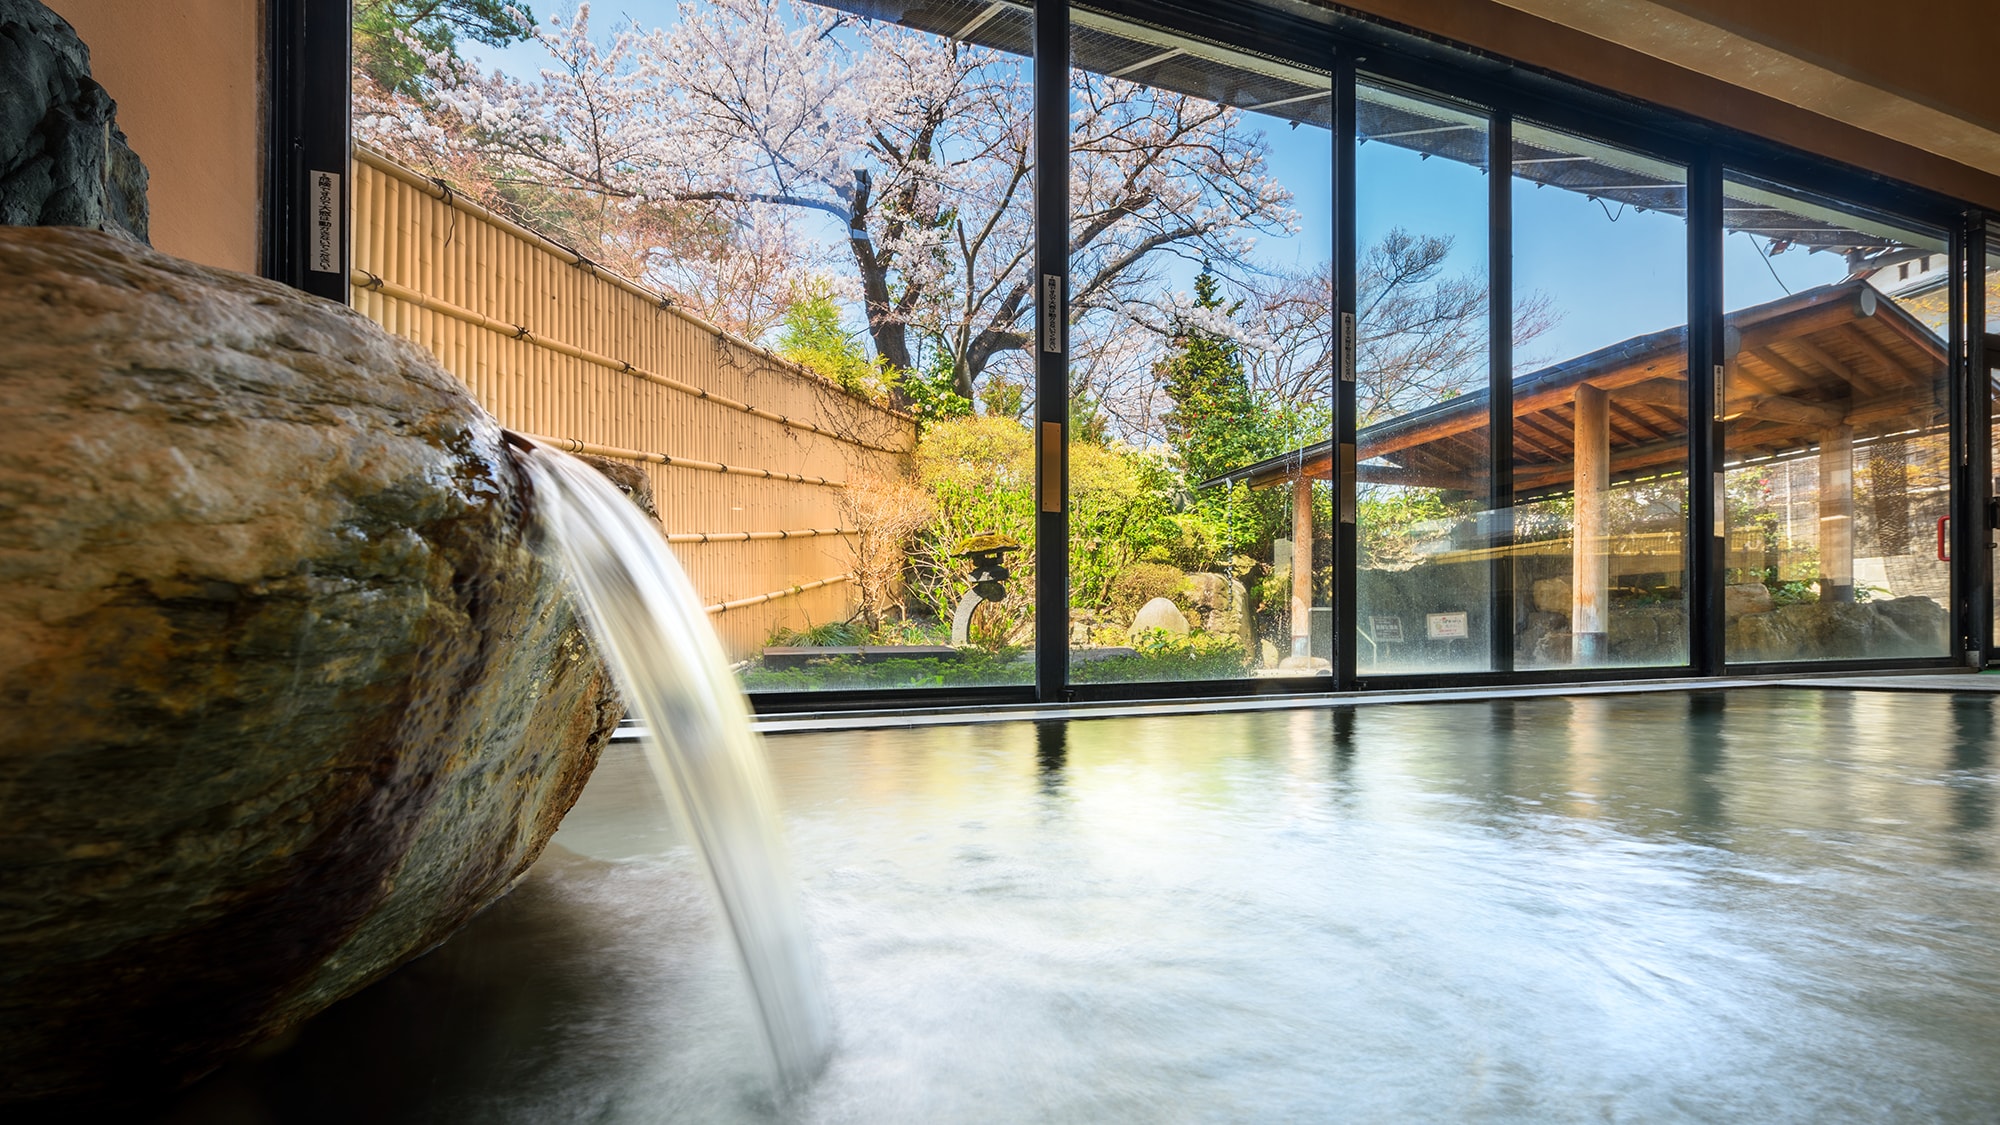 ■ Large communal bath Tendo ■ In the spring, "relaxing" while watching the big cherry blossoms